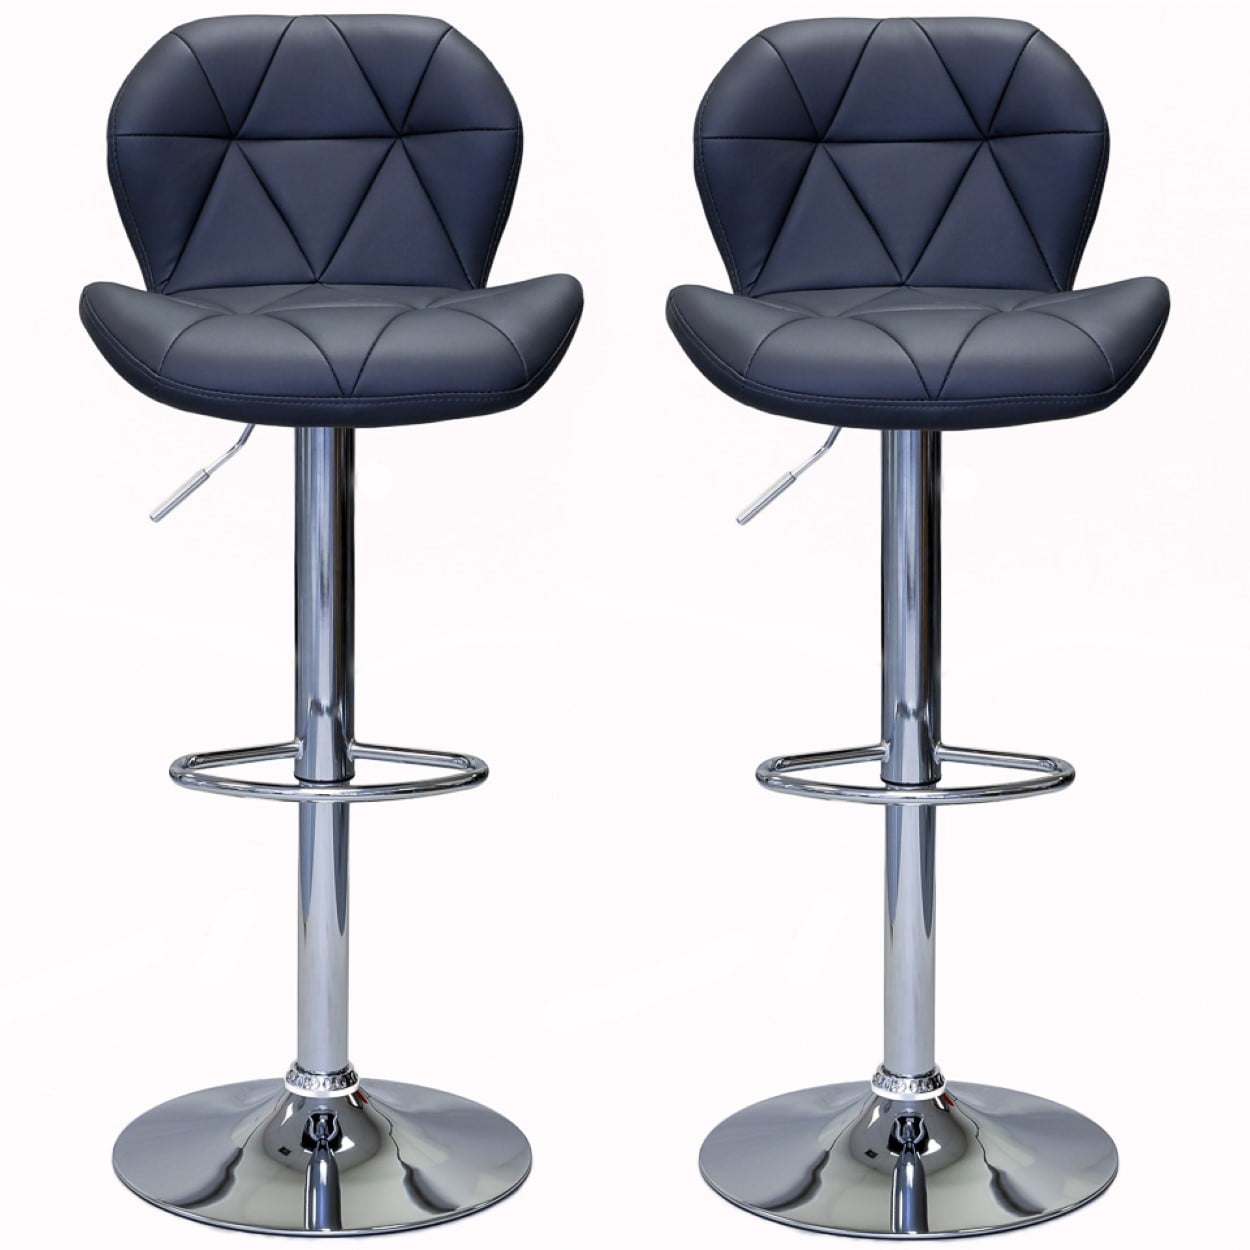 ViscoLogic DREAM Leatherette Star Quilted Adjustable Height Swivel Bar Stools 